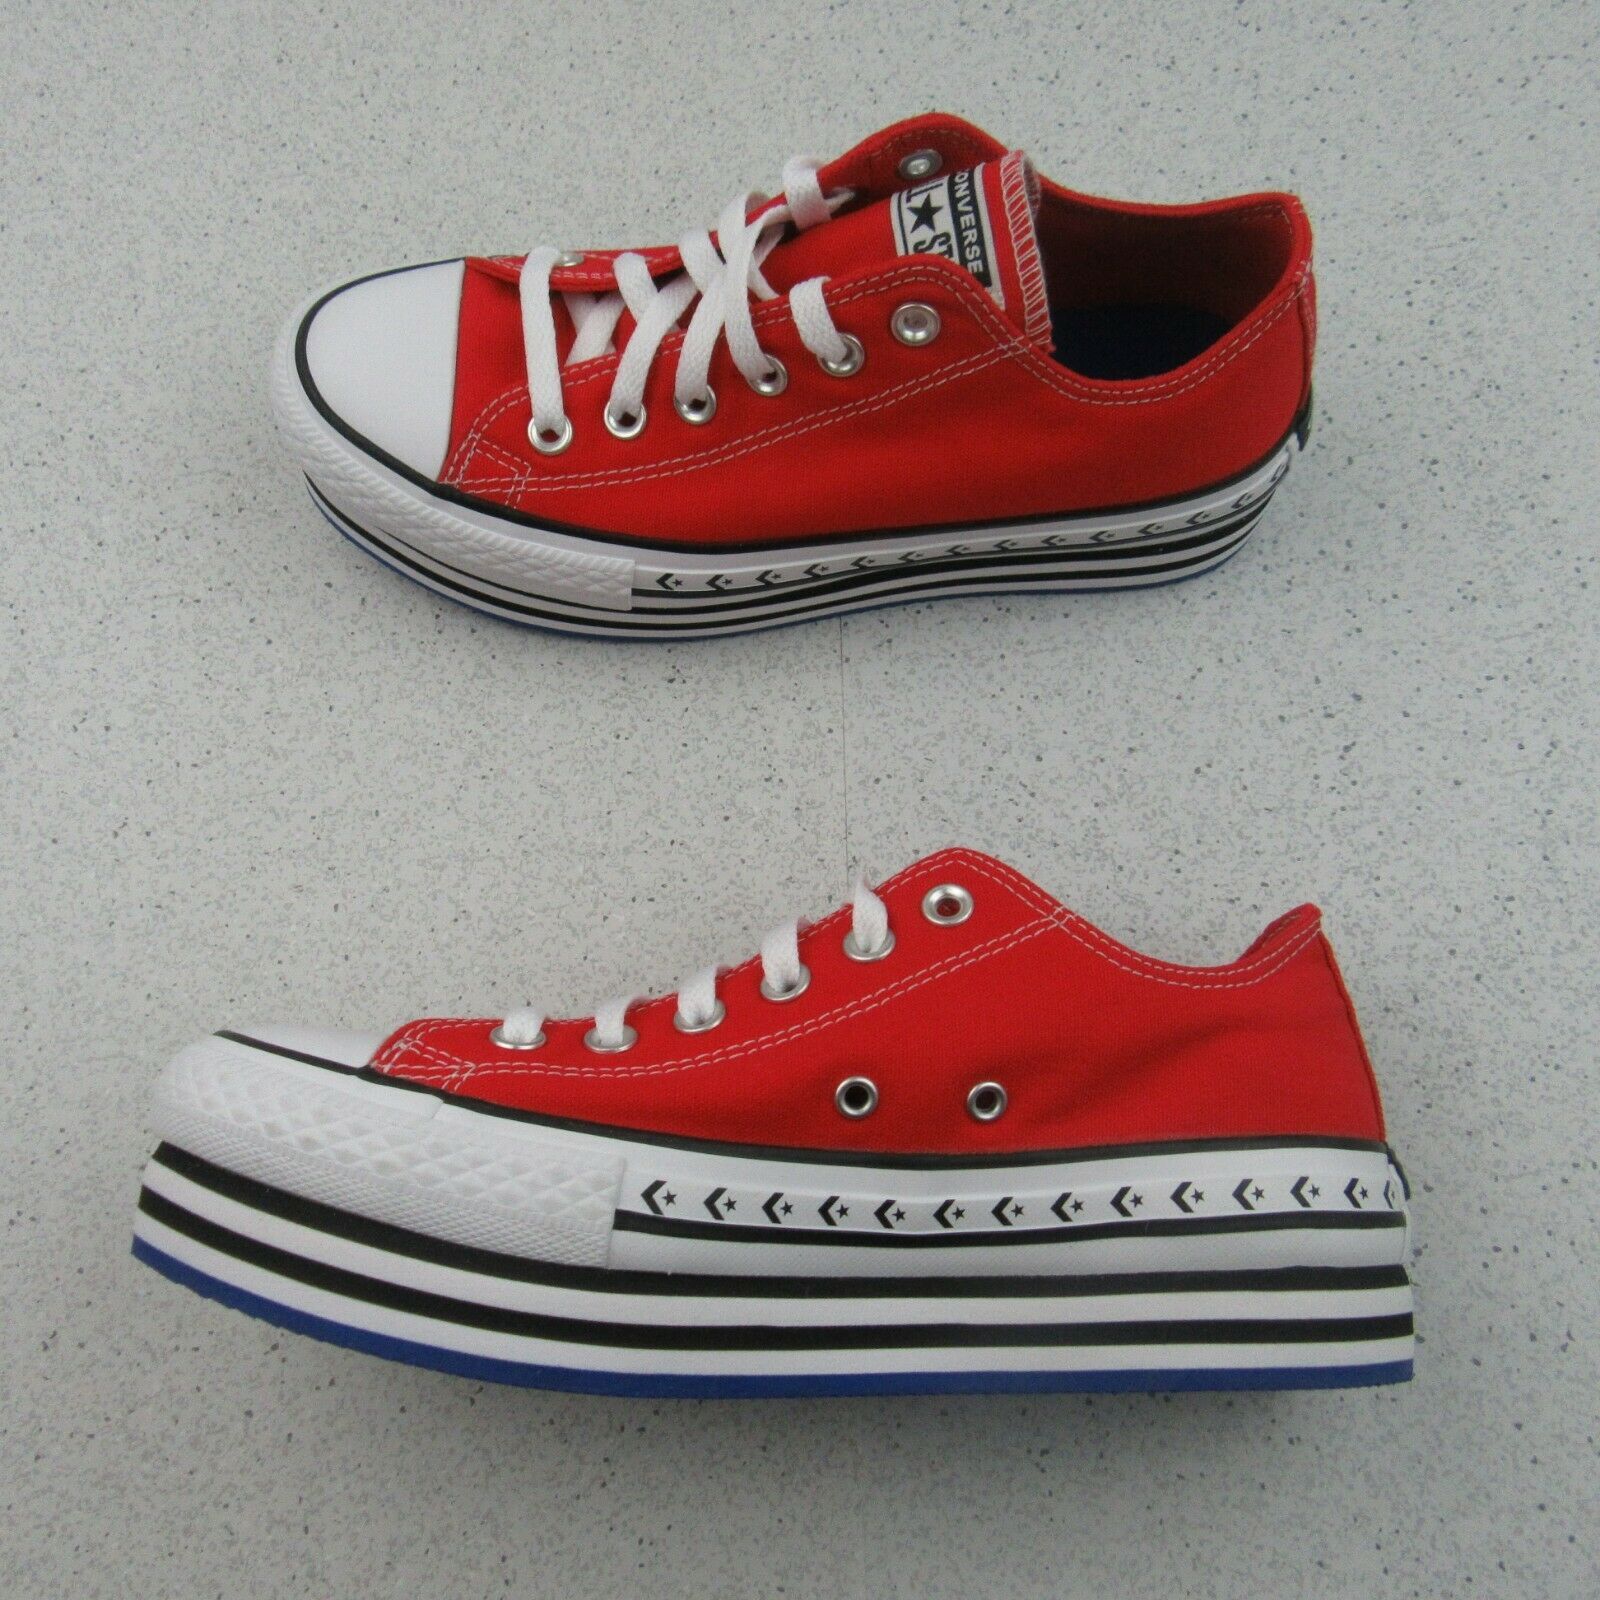 Converse CTAS Platform Layer Ox Womens Size 7.5 Red White Blue NEW